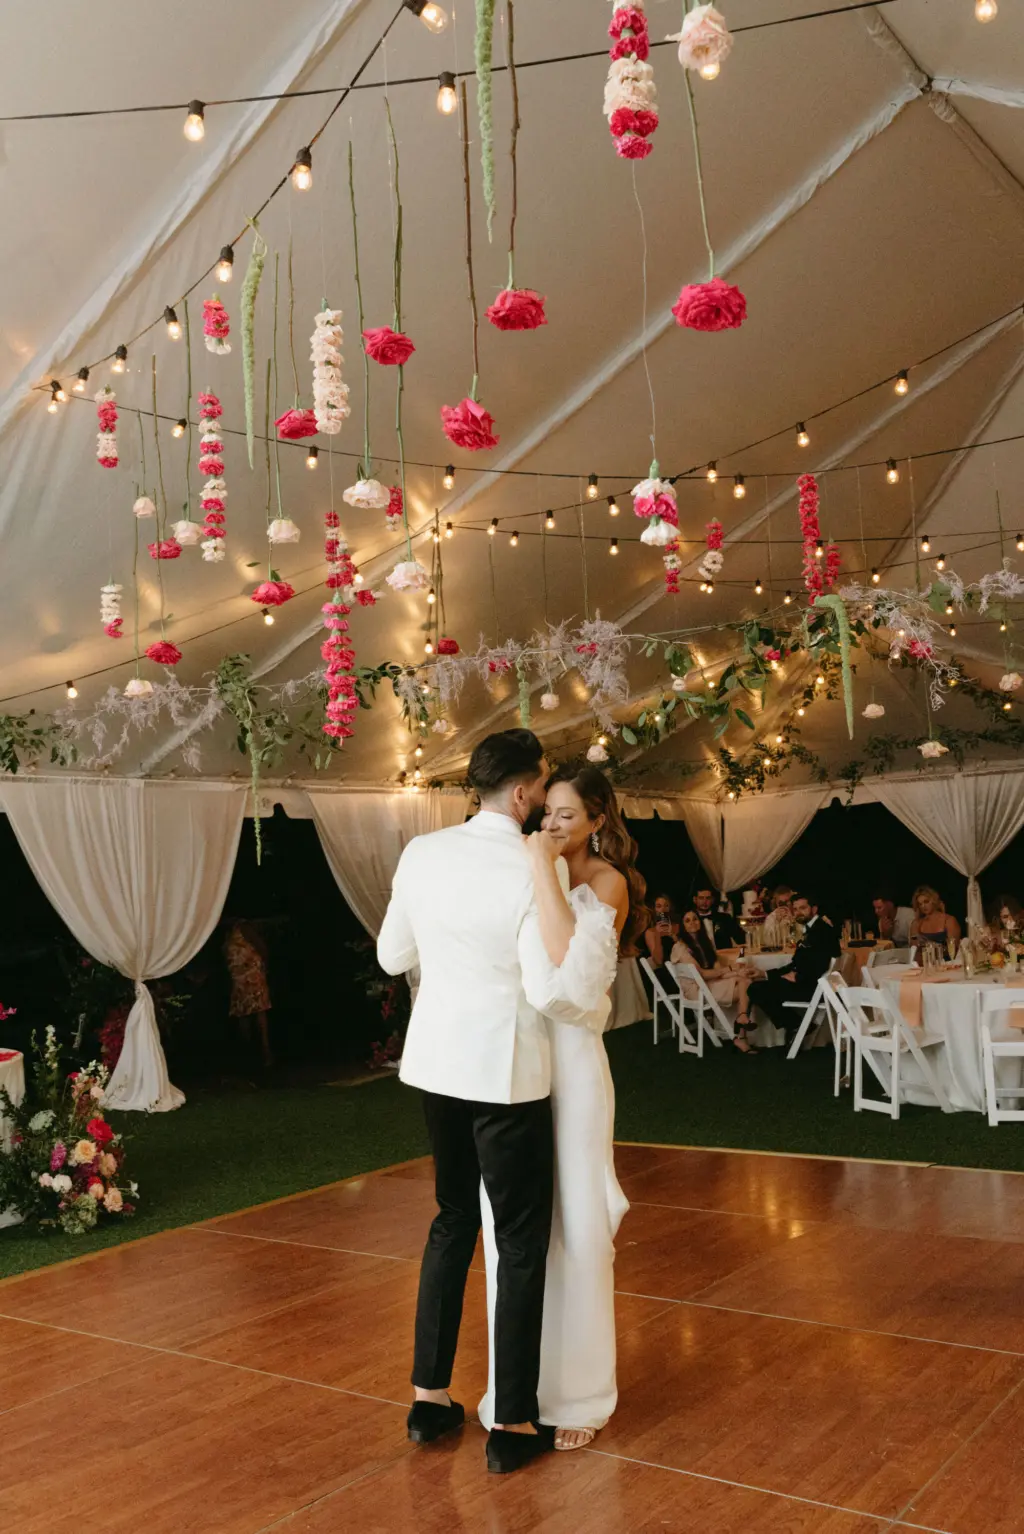 Bride and Groom First Dance Wedding Portrait | White and Pink Tented Garden Wedding Reception Inspiration | Suspended Hanging Roses, Carnations, and Greenery, and Market String Bistro Lights Decor Ideas | St. Pete DJ Graingertainment | Tampa Bay Wedding Planner Wilder Mind Events